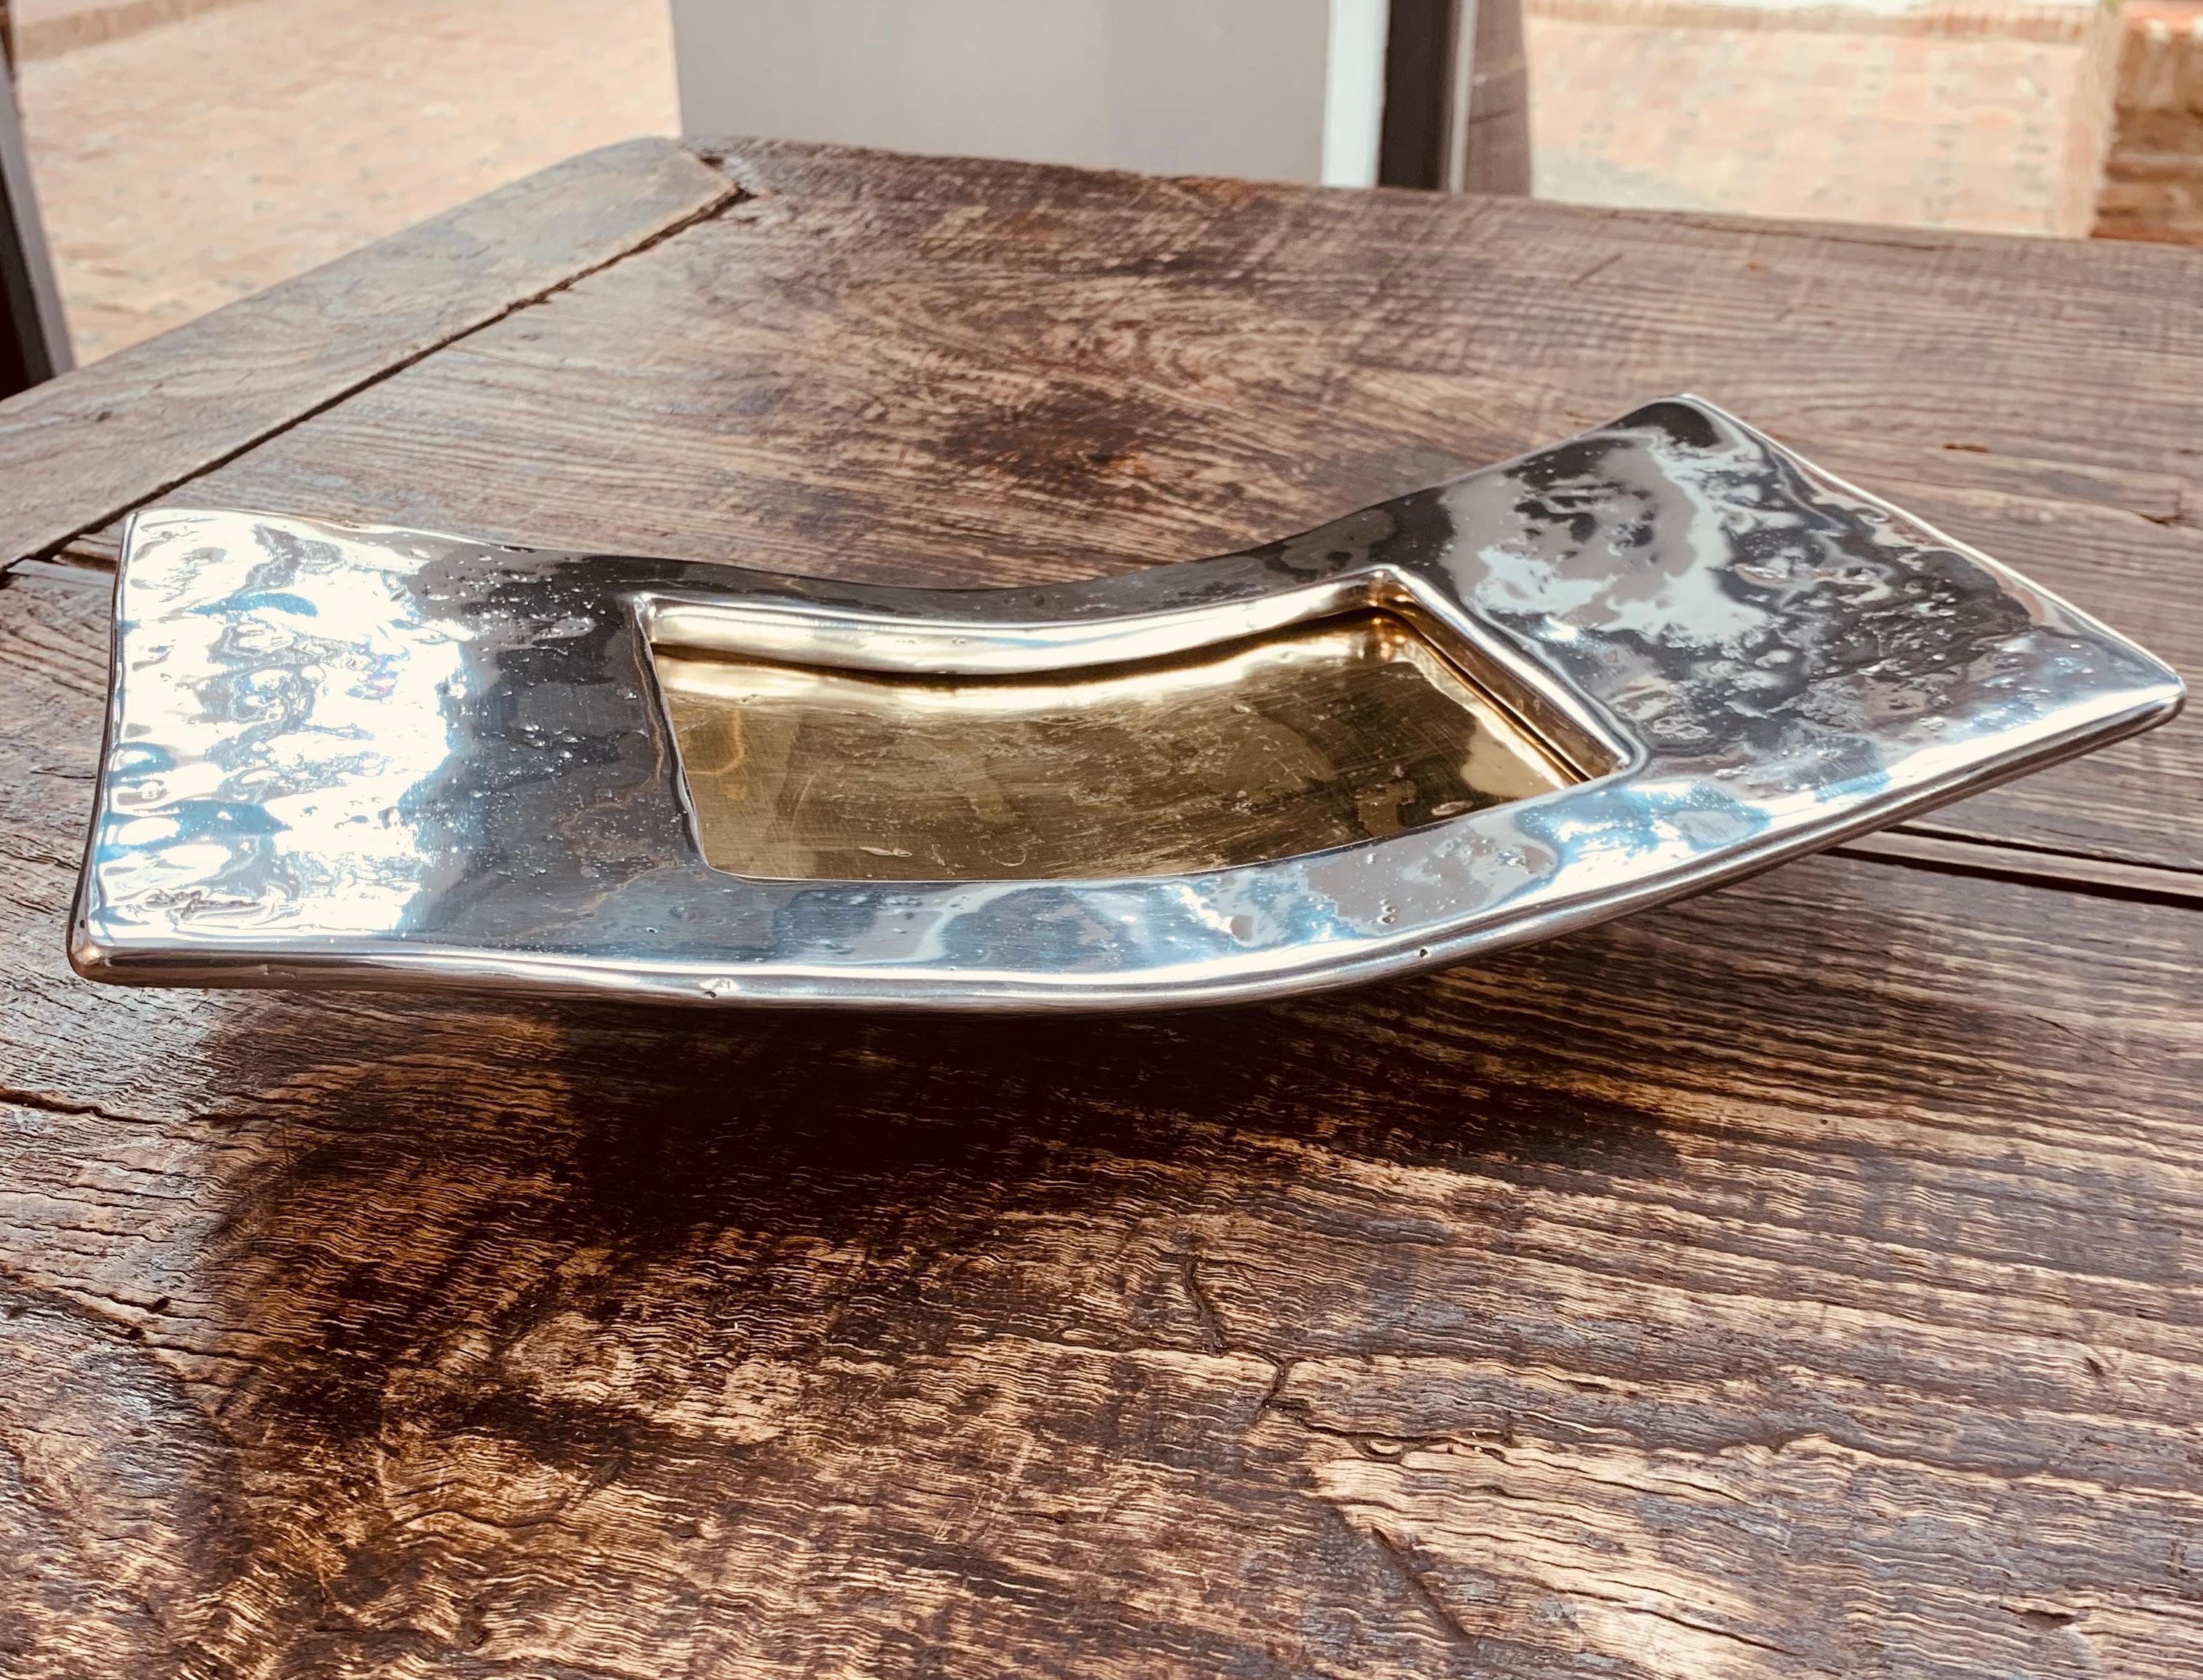 The decorative tray  was created by David Marshall, it is made of sand cast aluminum and sand cast brass.
Handmade, mounted and finished in our foundry and workshop in Spain from recycled materials.
Certified authentic by the Artist David Marshall